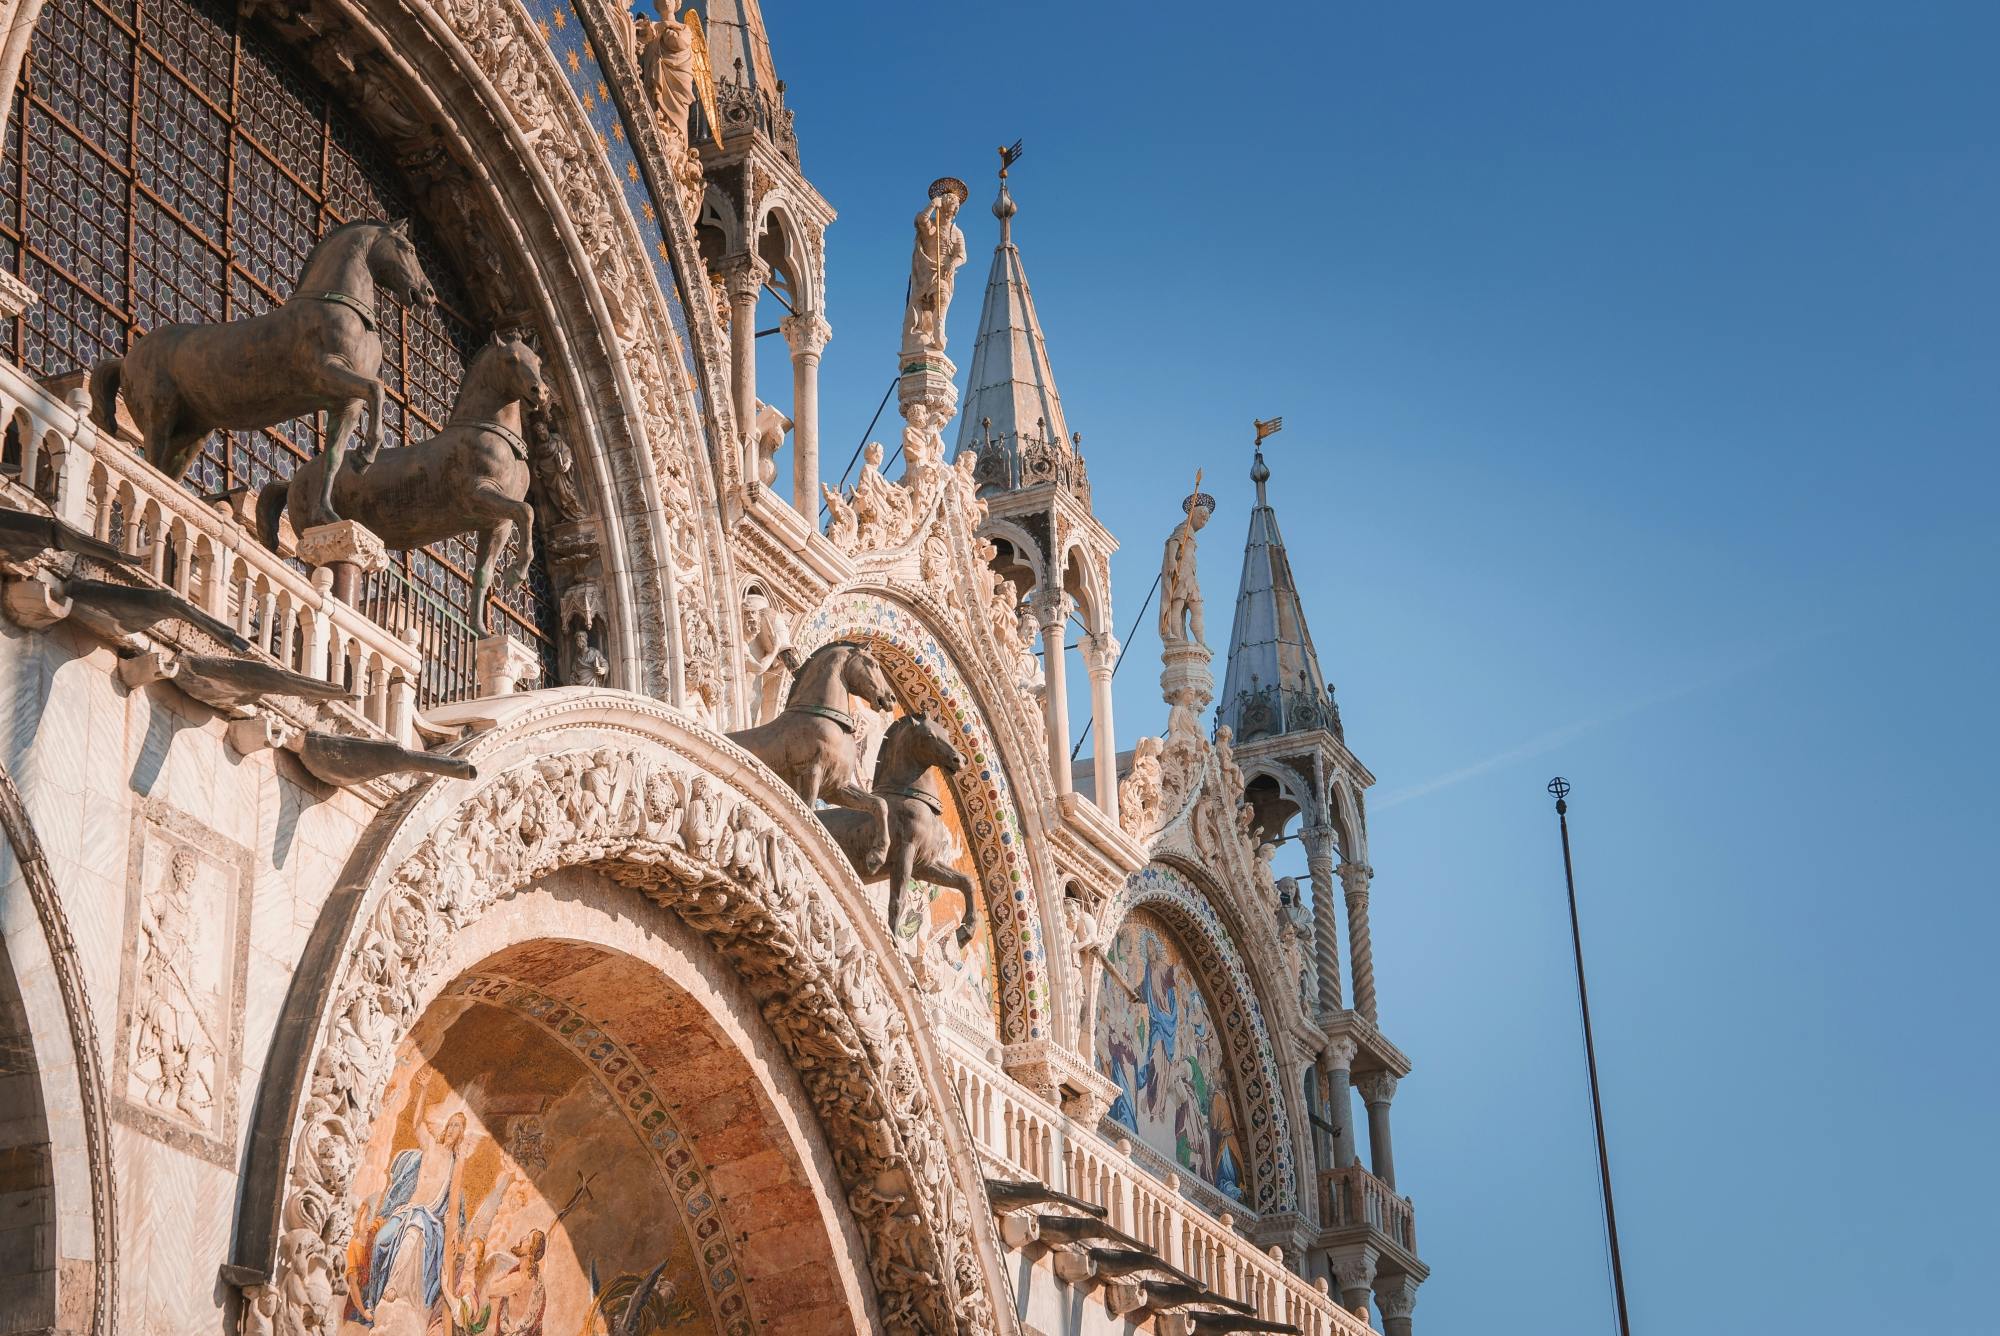 Tour of Doge's Palace and Golden Basilica with Skip the Line ticket